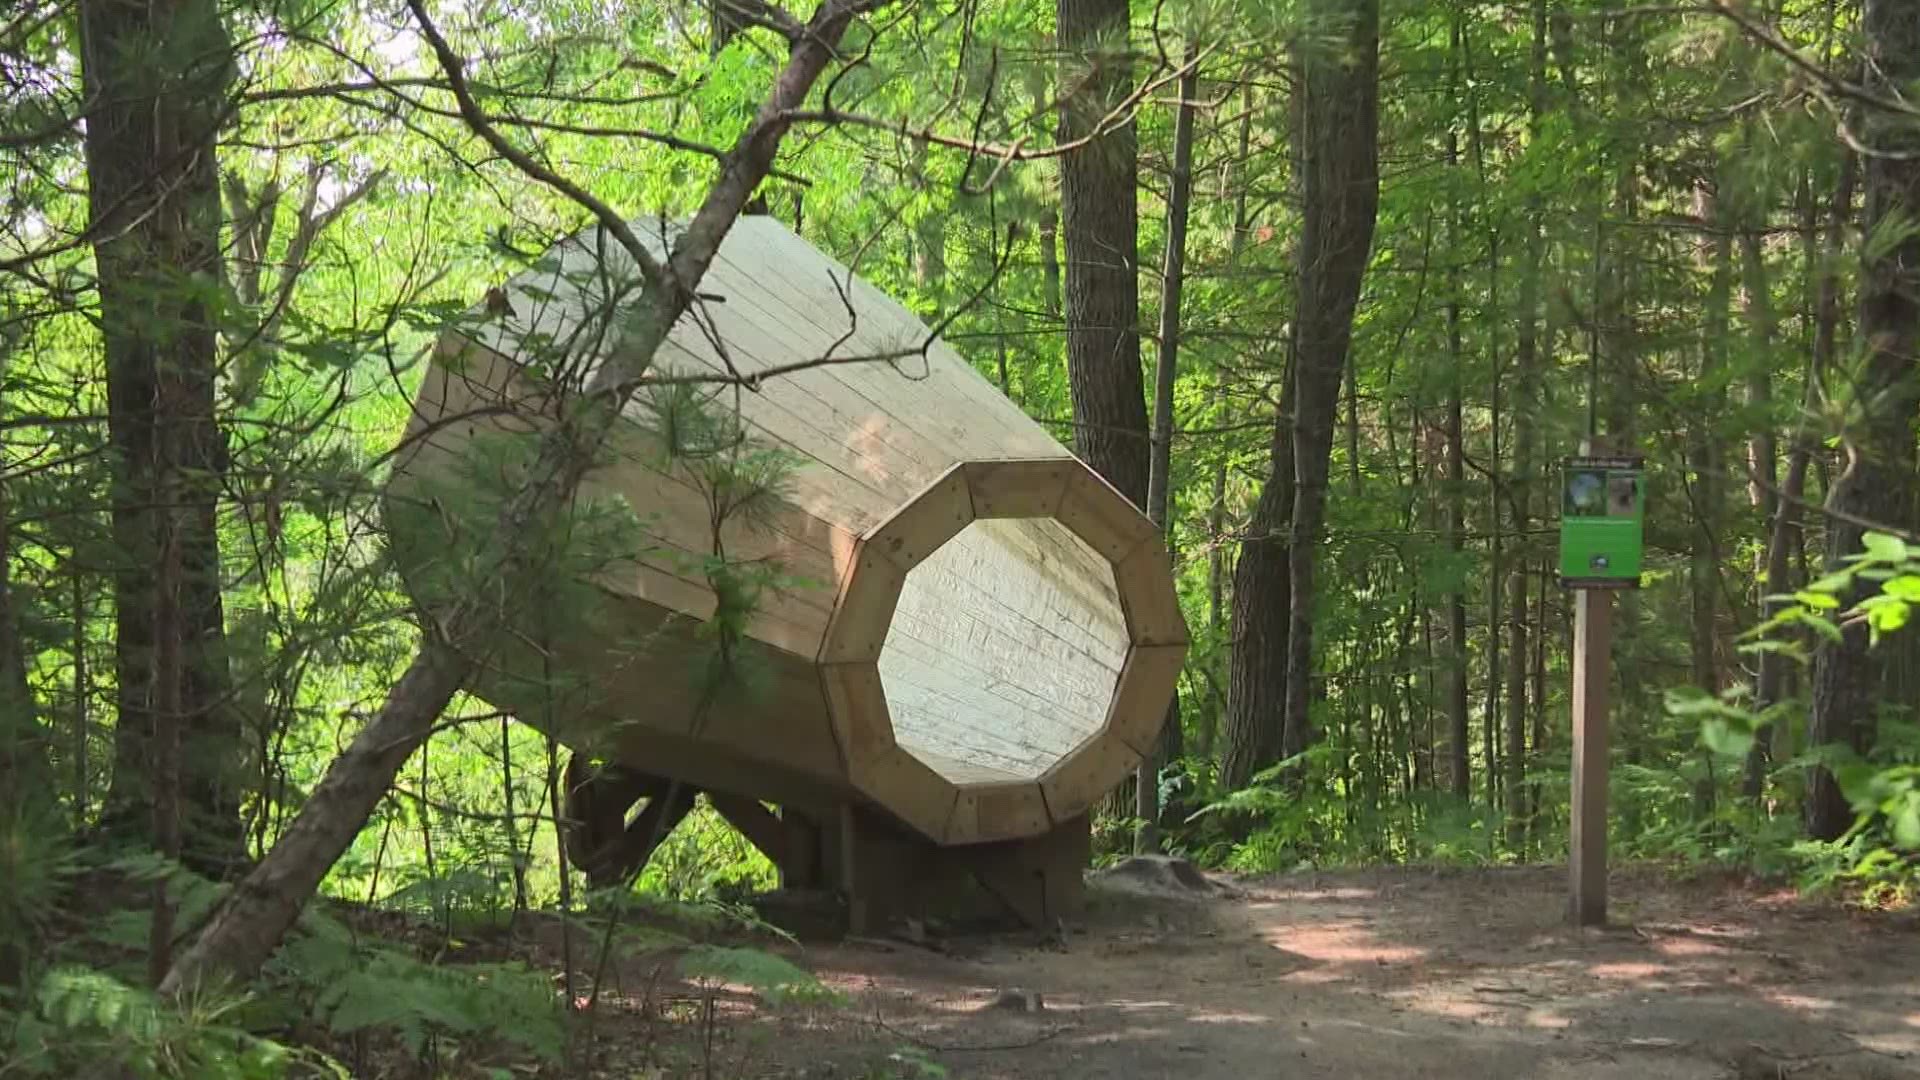 Tucked away, deep in the woods in Cheboygan County is a giant wooden funnel that brings the sounds of nature to life like never before.